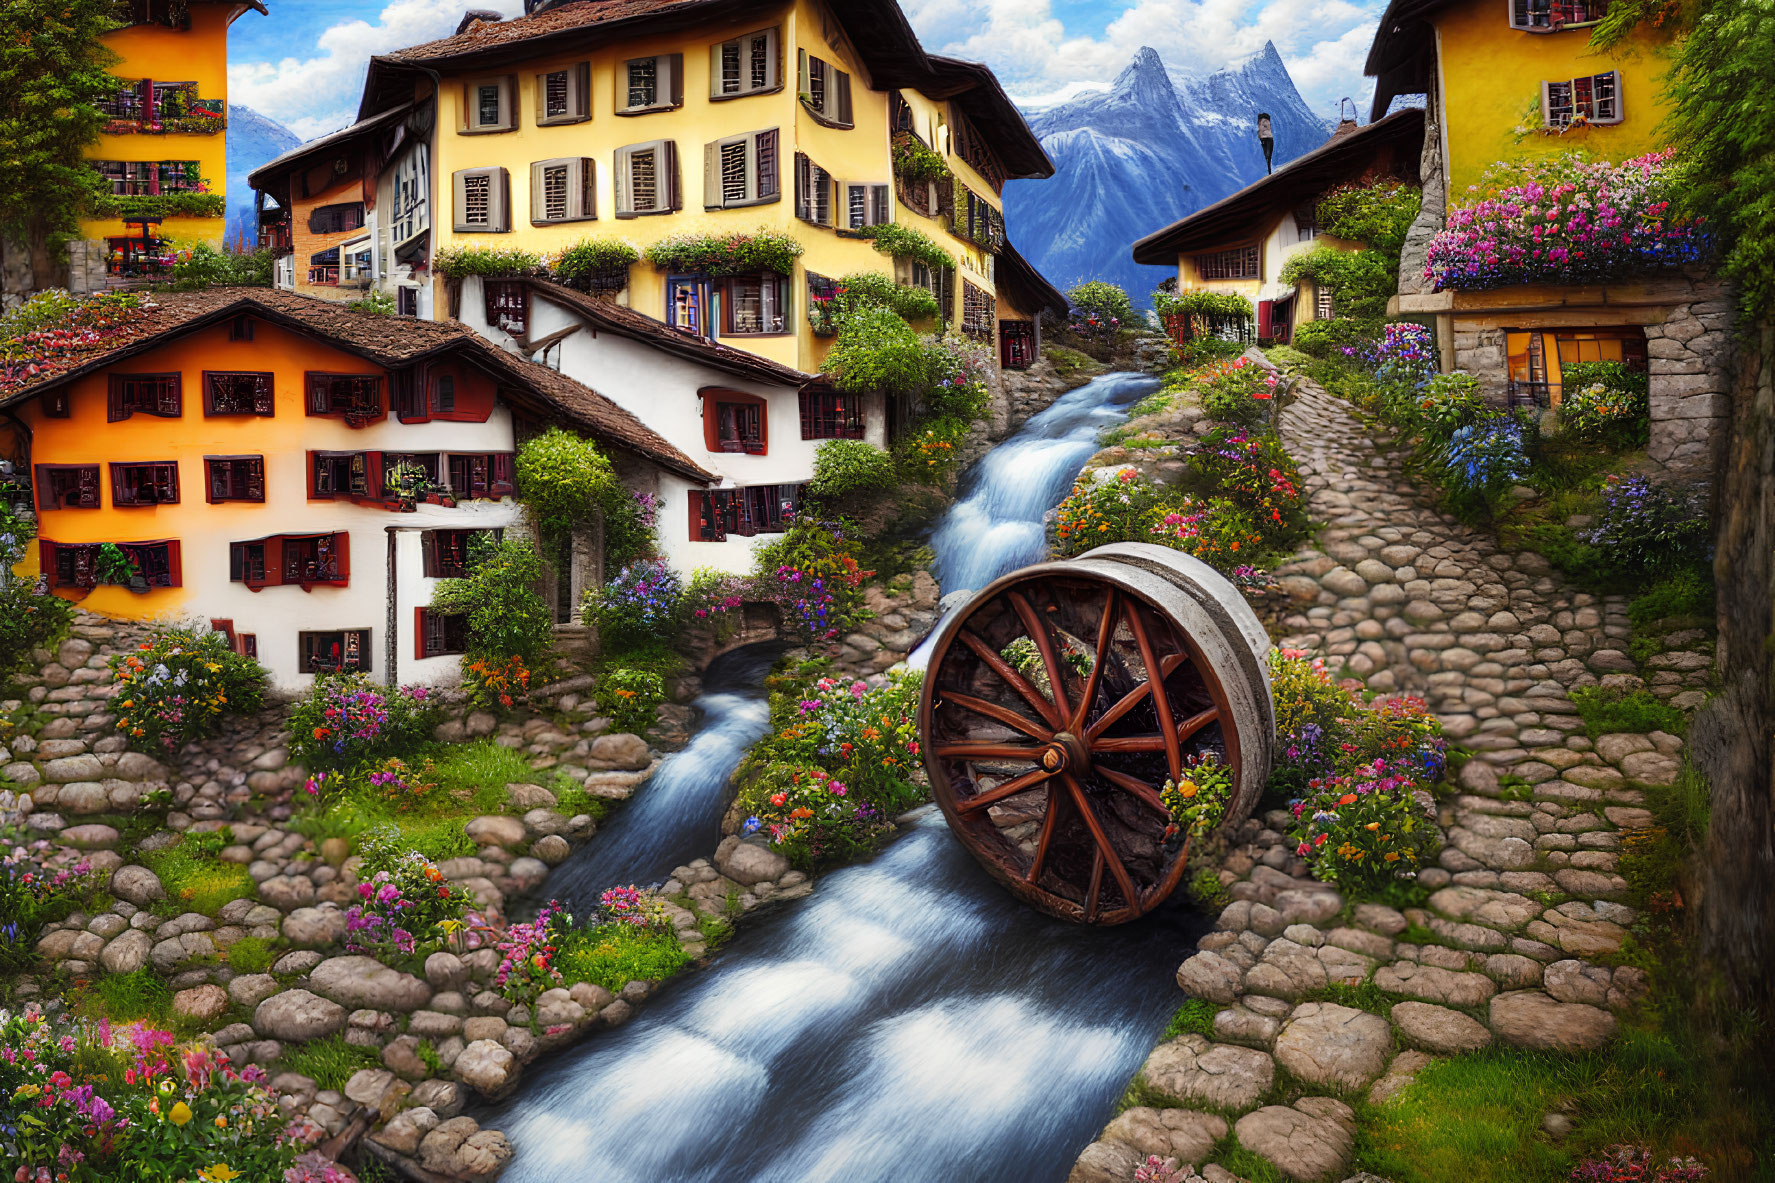 Colorful houses, cobblestone paths, and a clear stream in a picturesque village